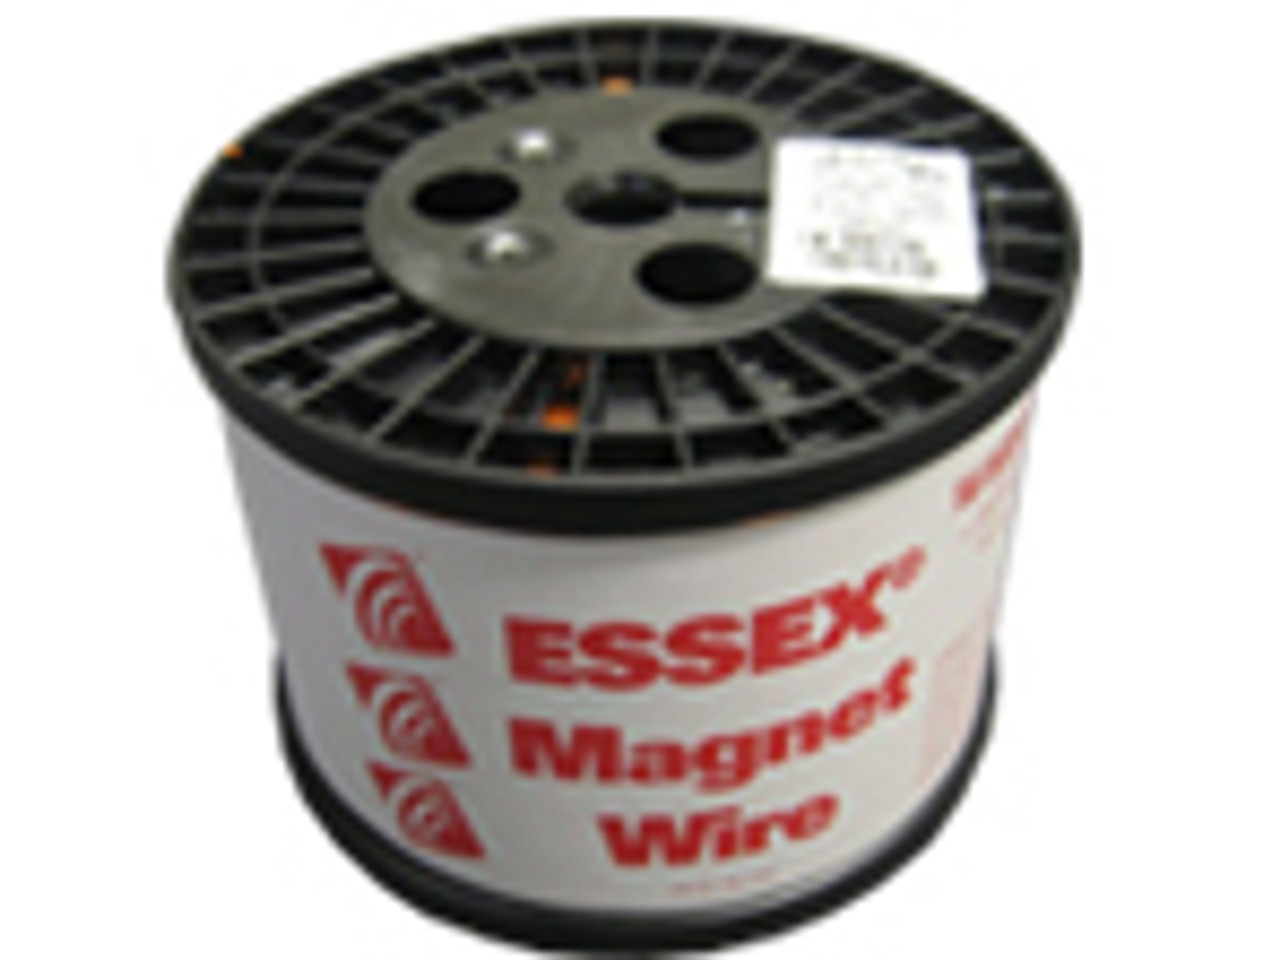 Magnet Wire Essex Magnet Wire 16 AWG Heavy Build 200 Degree Celsius 9 LB Spool (MW-16AWG)